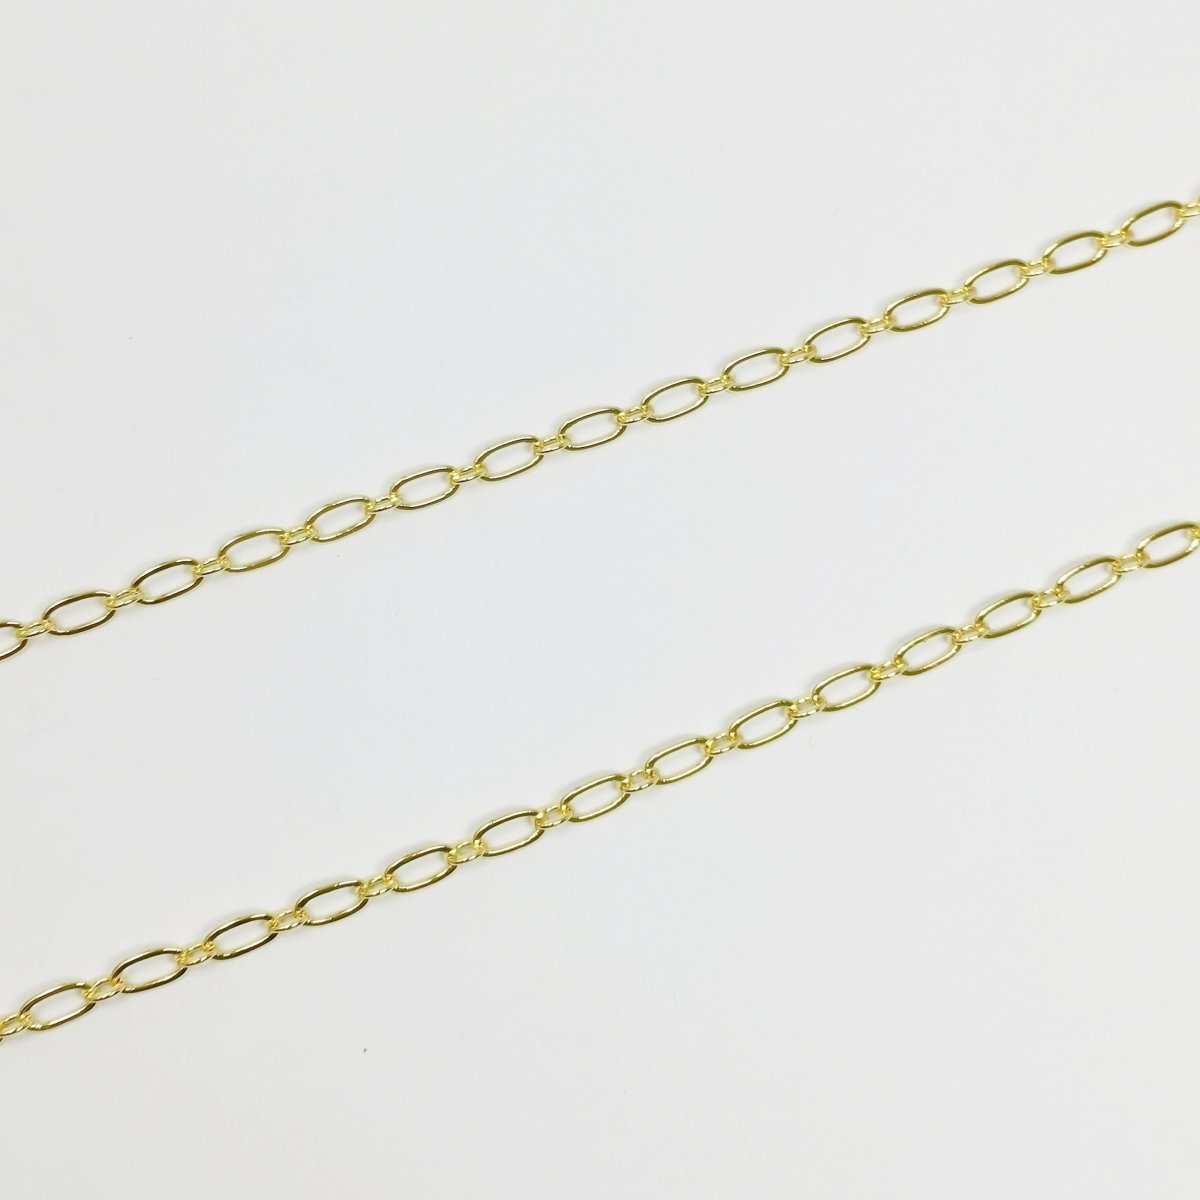 Figaro Long and short fancy 24K Gold Filled Chain By Yard, Wholesale Bulk Roll Chain For Jewelry Making, Width 4.9mm | ROLL-368 ROLL-401 Clearance Pricing - DLUXCA